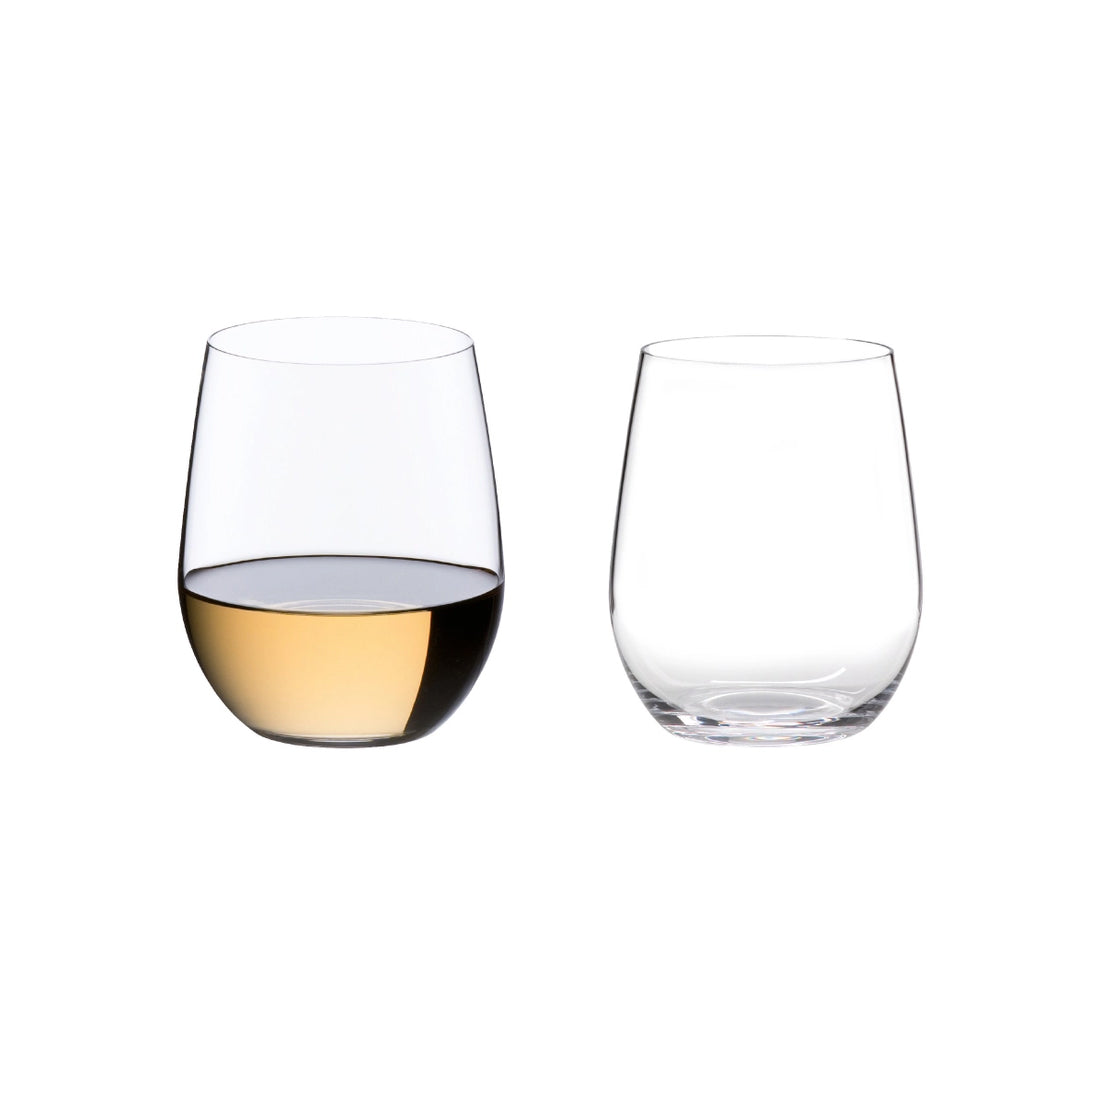 Riedel 'O' Buy 8 Pay 6 Chardonnay Stemless Wine Glasses (Set of 8)